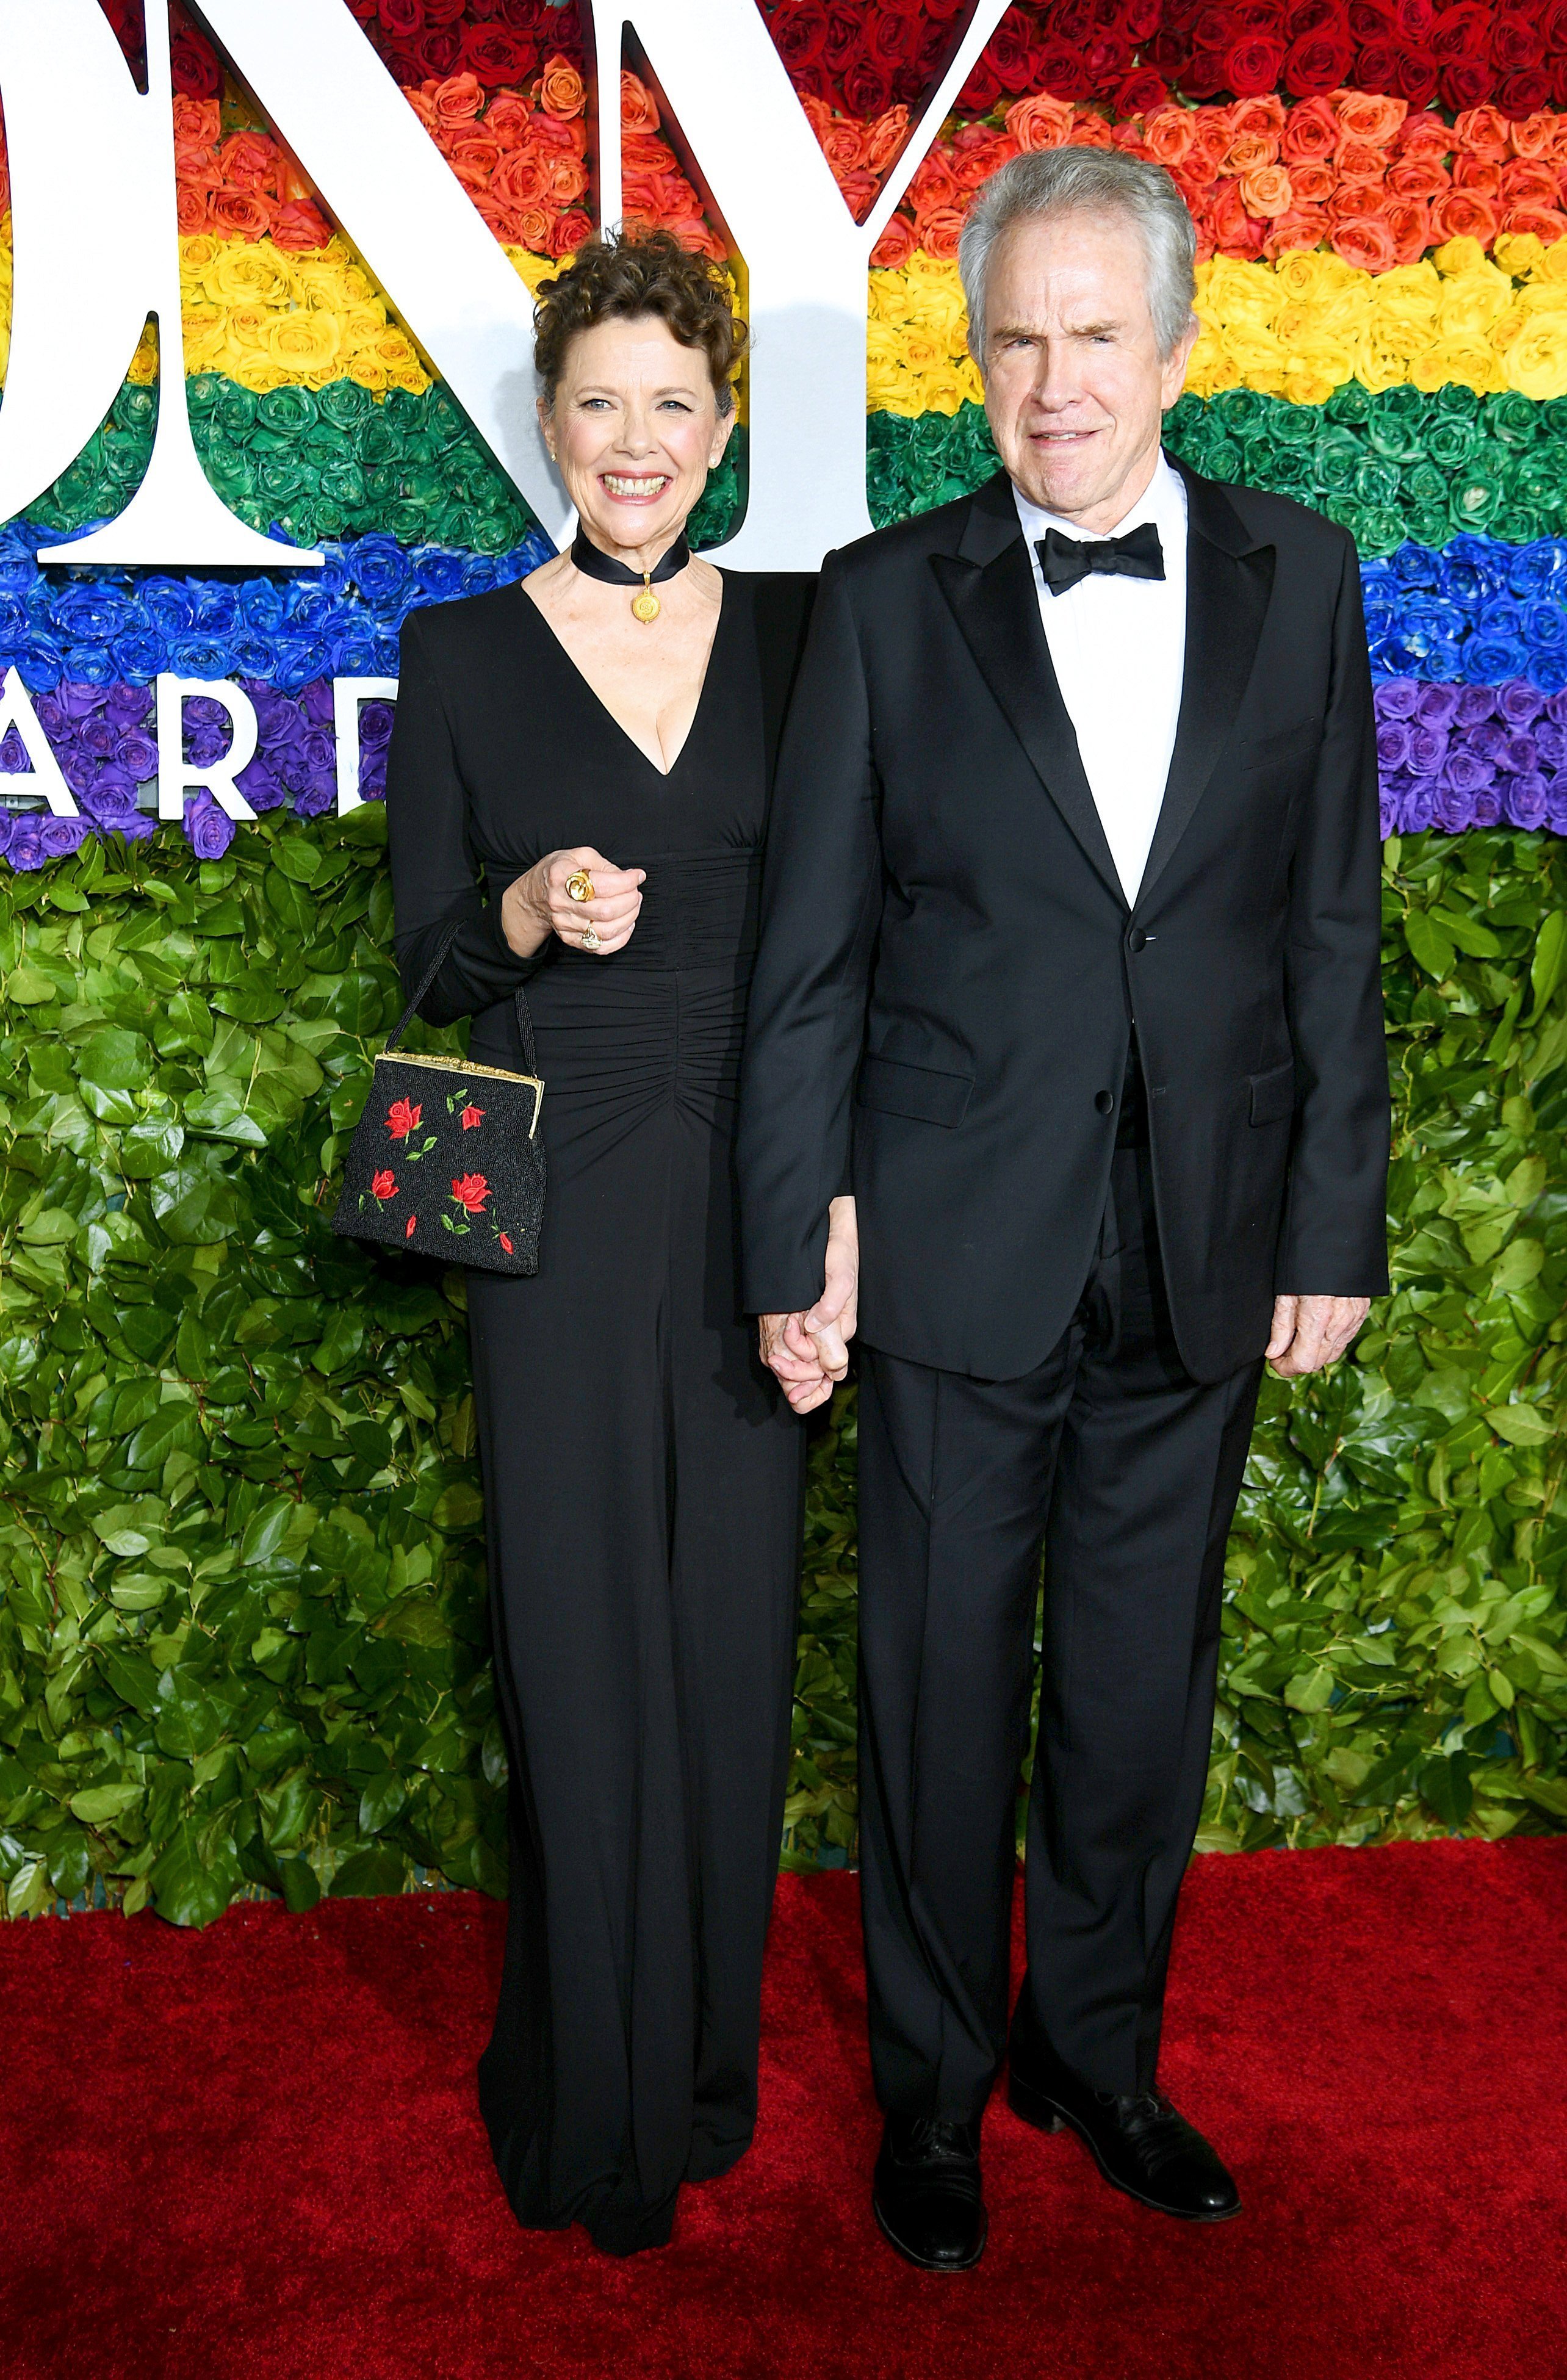 Annette Bening and Warren Beatty attends the 73rd Annual Tony Awards at Radio City Music Hall on June 09, 2019, in New York City | Photo: Getty Images.